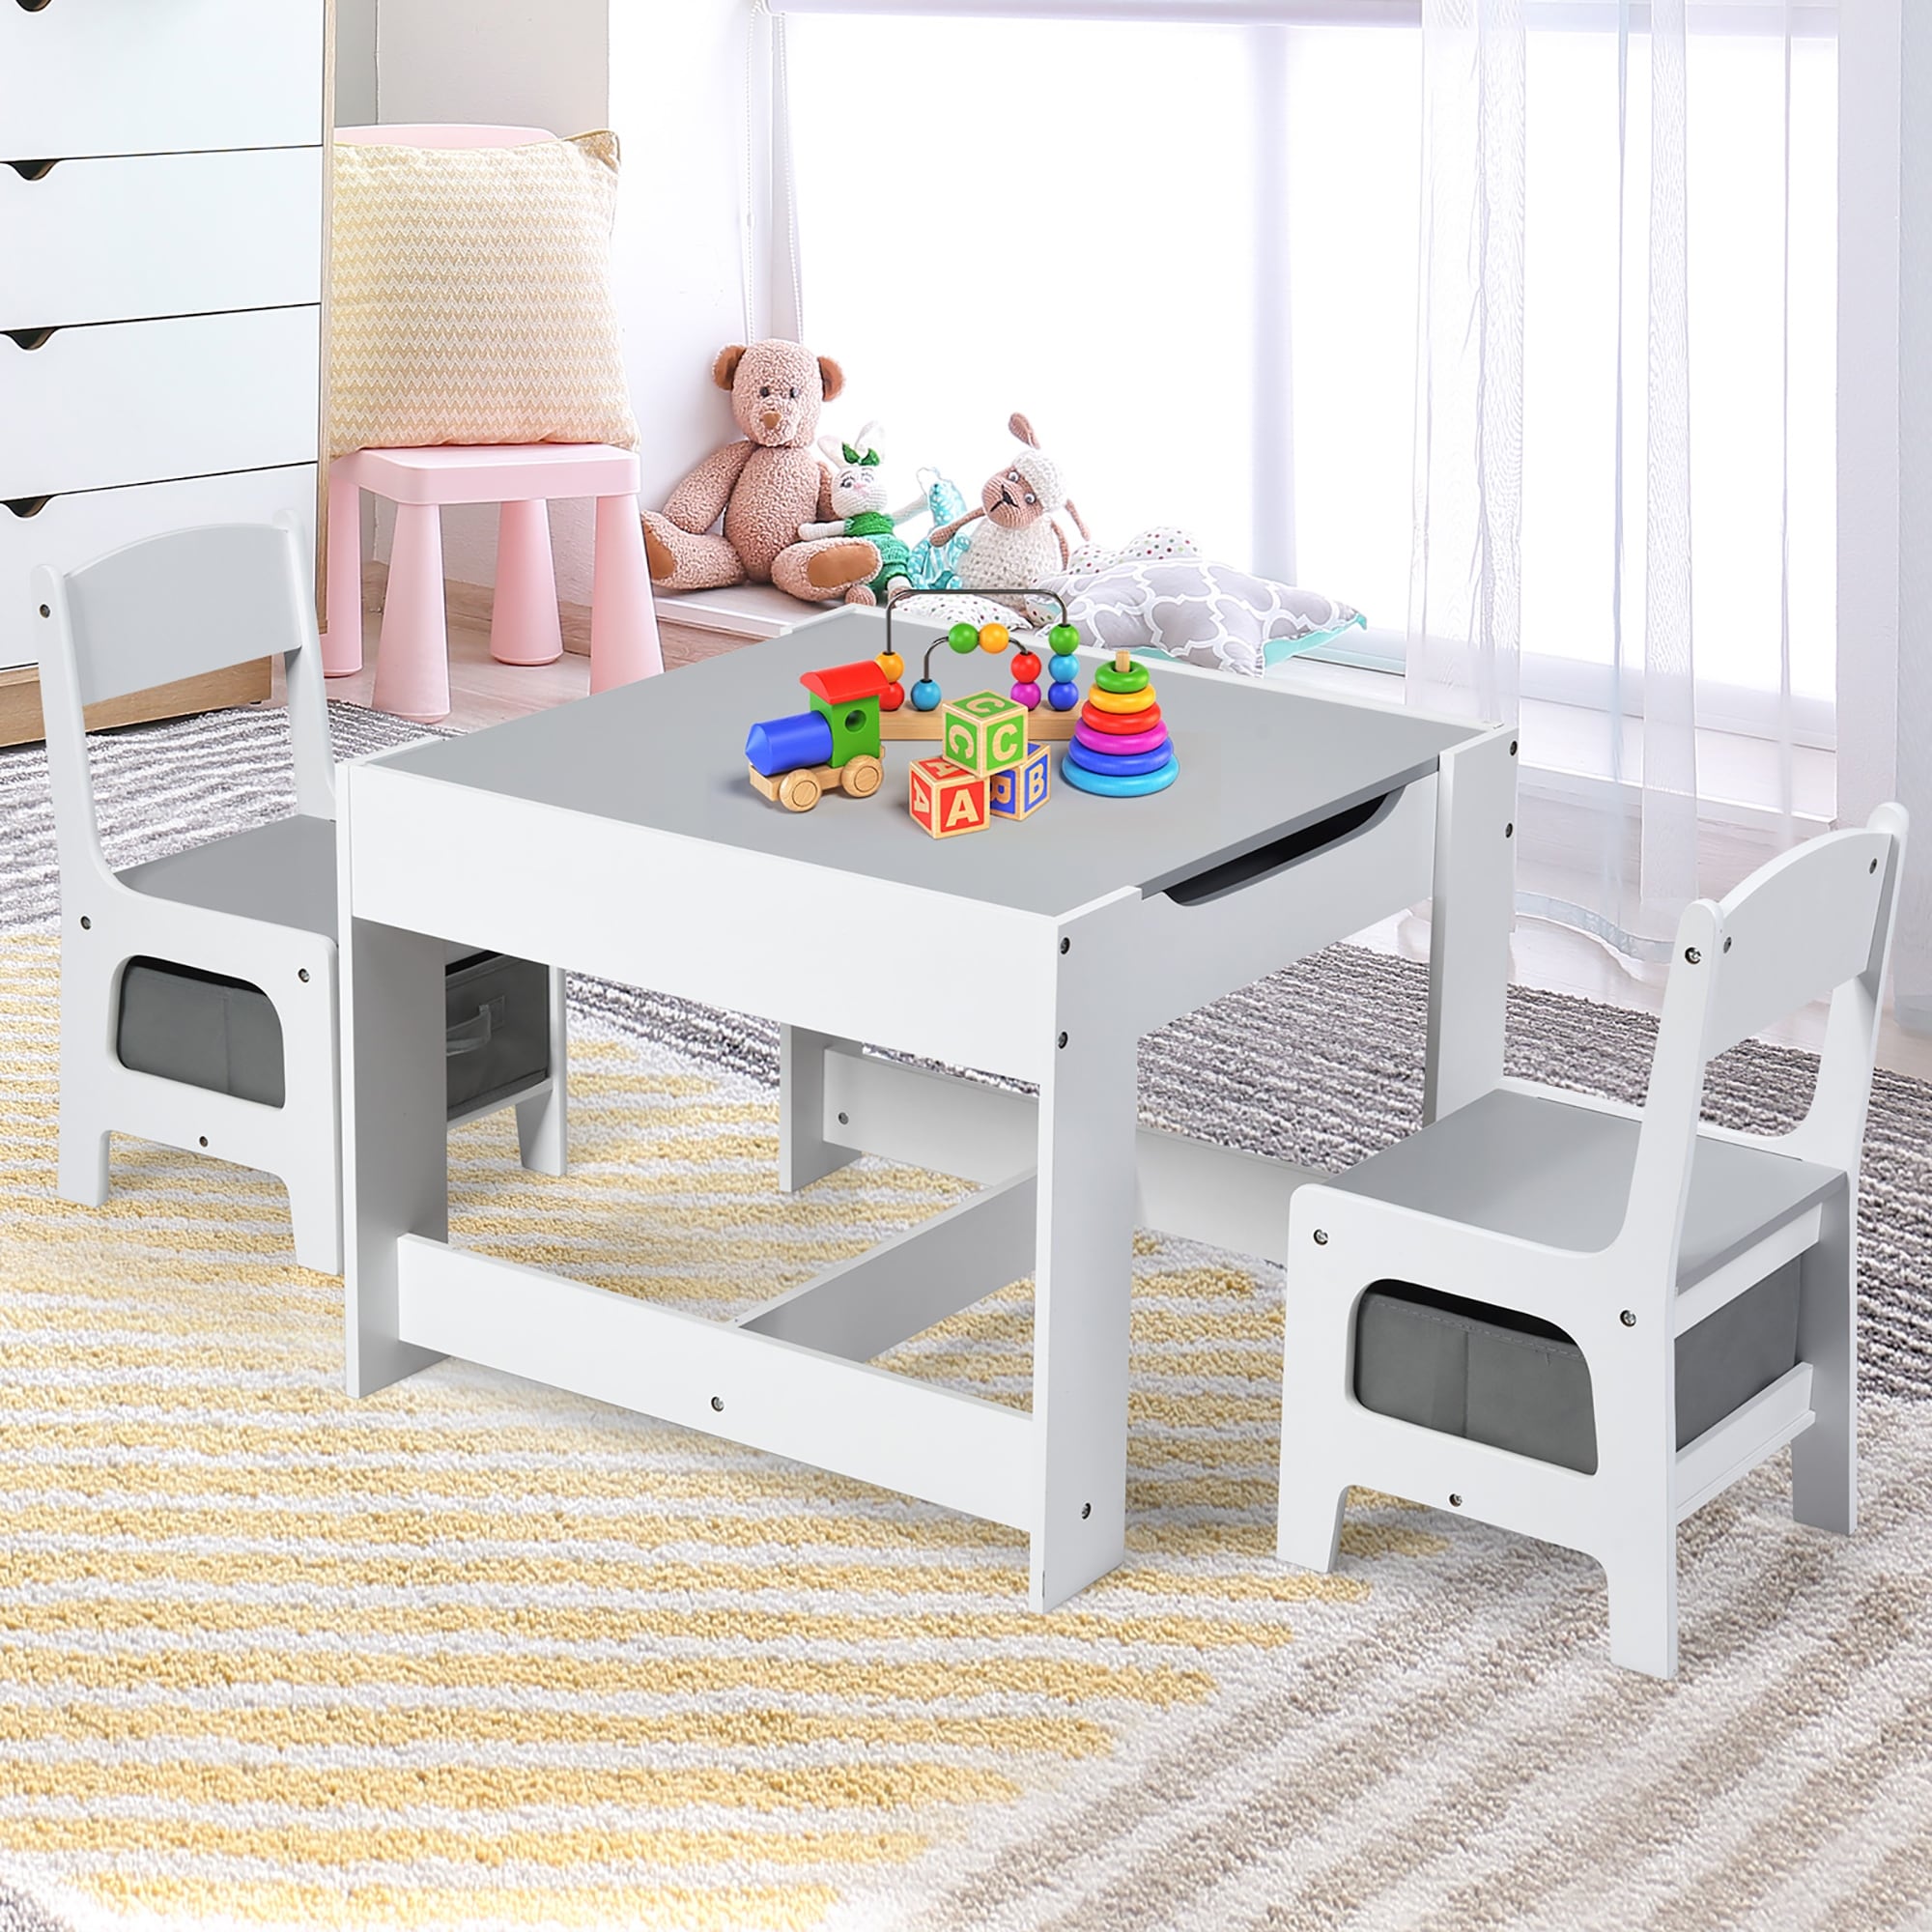 3-in-1 Kids Table and Chair Set Wooden Activity Table with Chairs